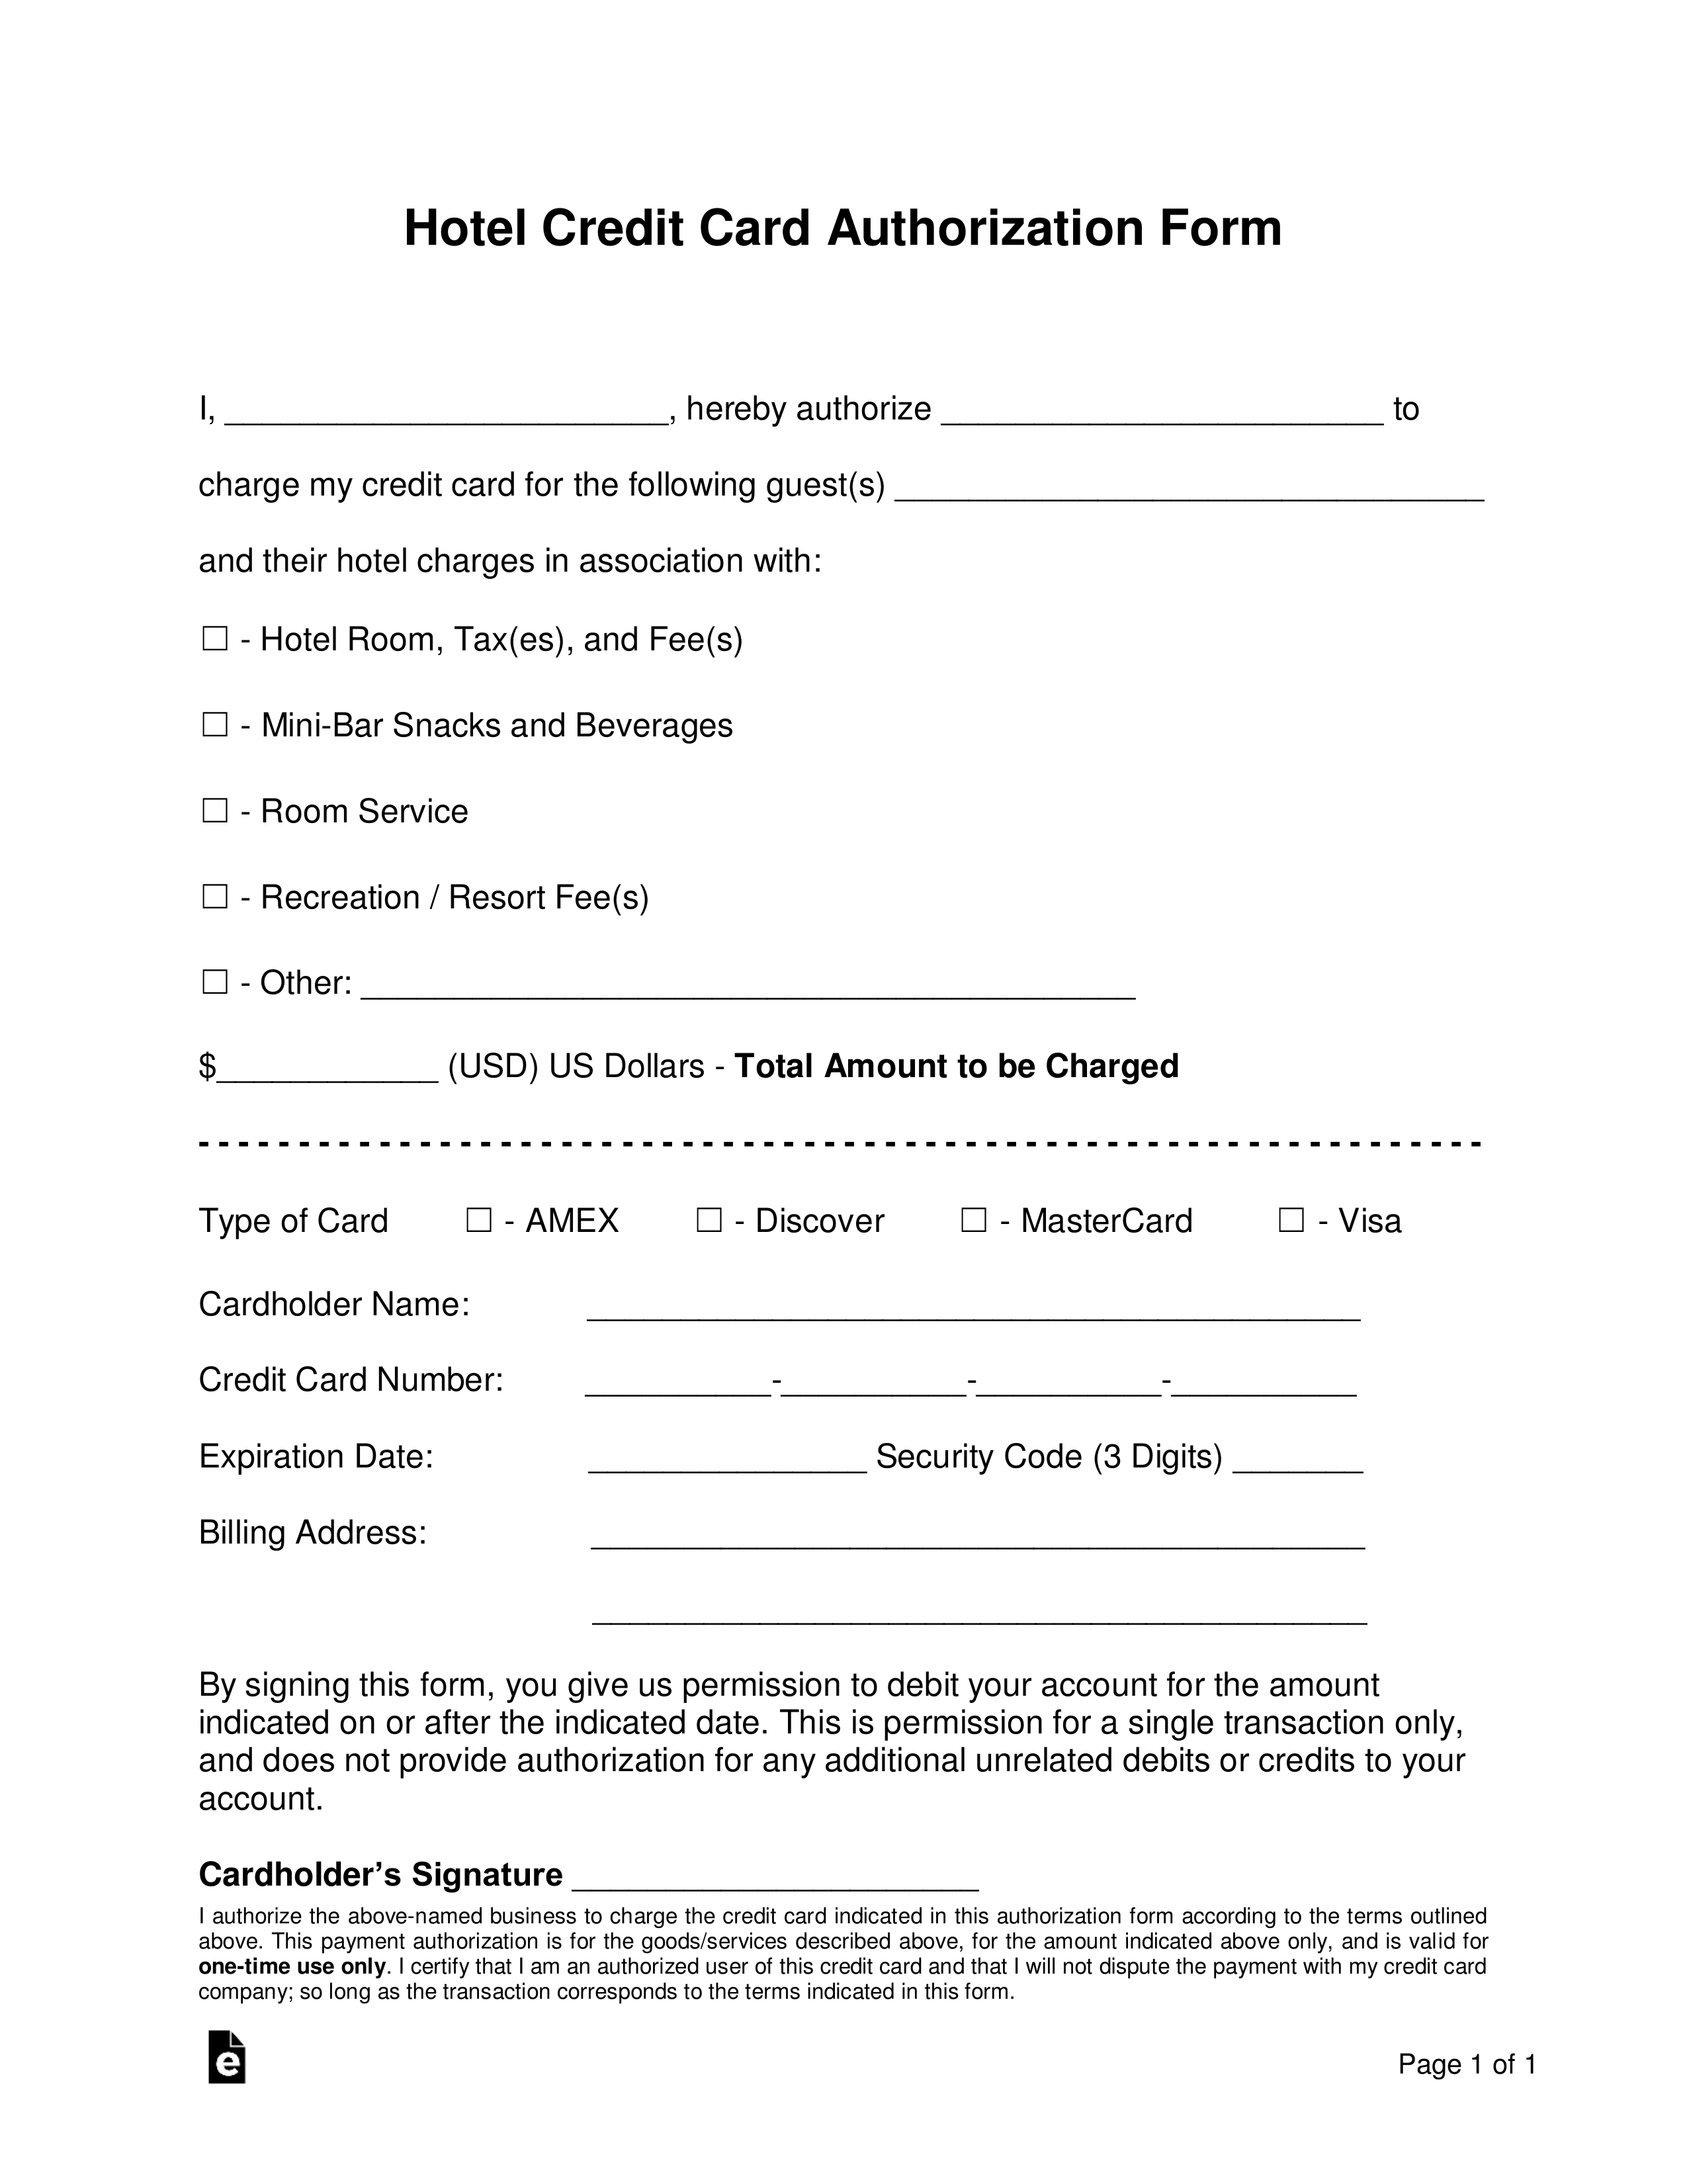 Hotel Credit Card Authorization Form Template CUMED ORG